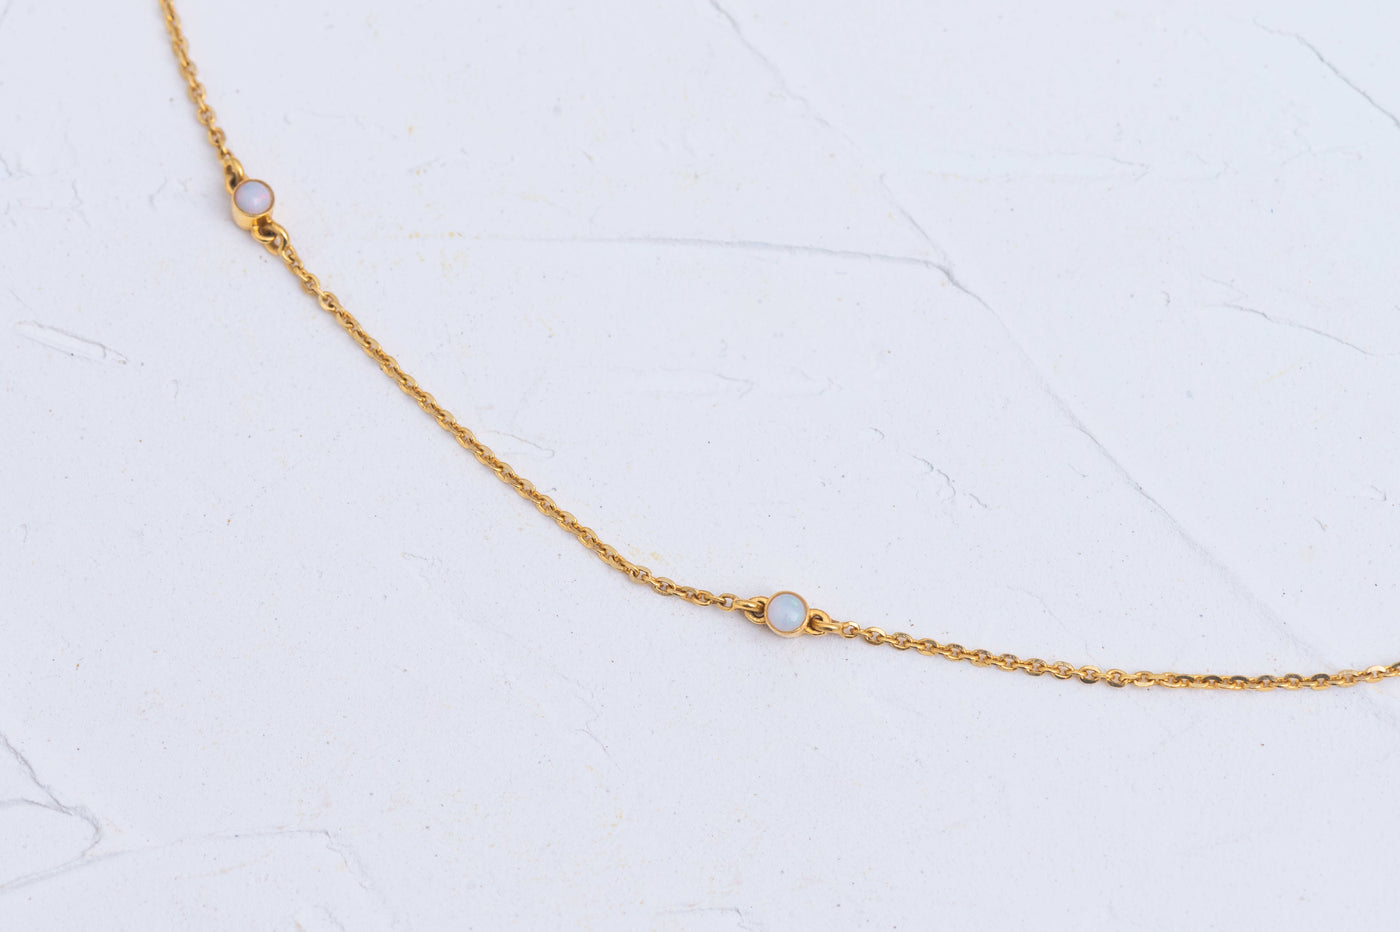 Round Opal Necklace in 14k Yellow gold